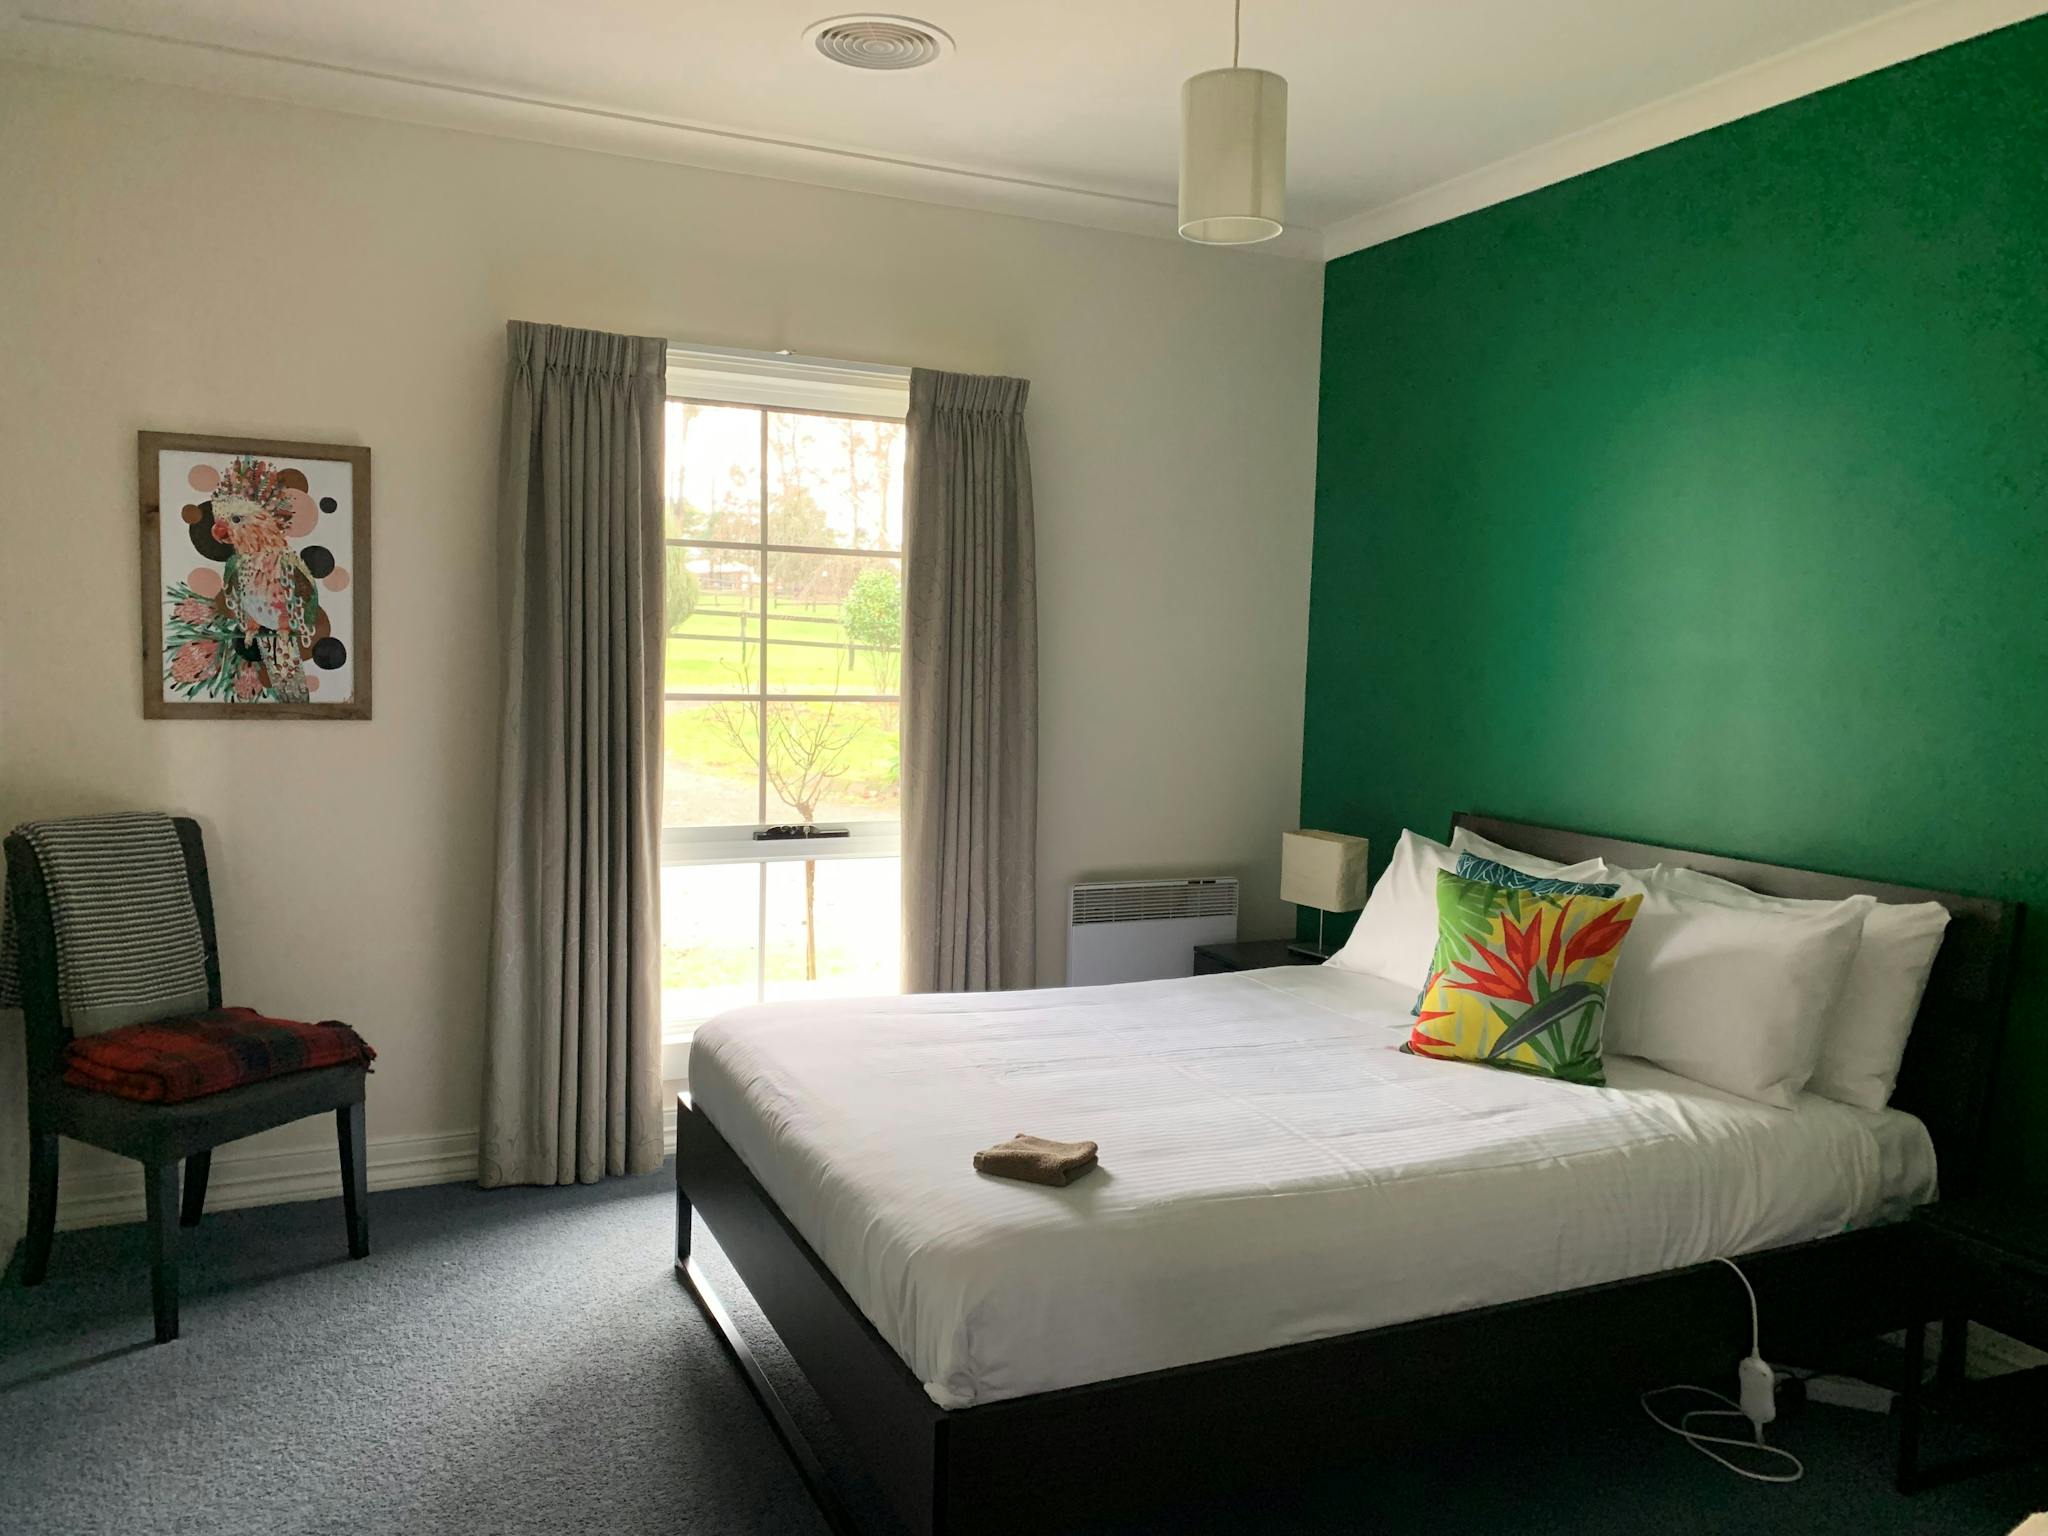 A queen bed and a single bed in a room with a green wall